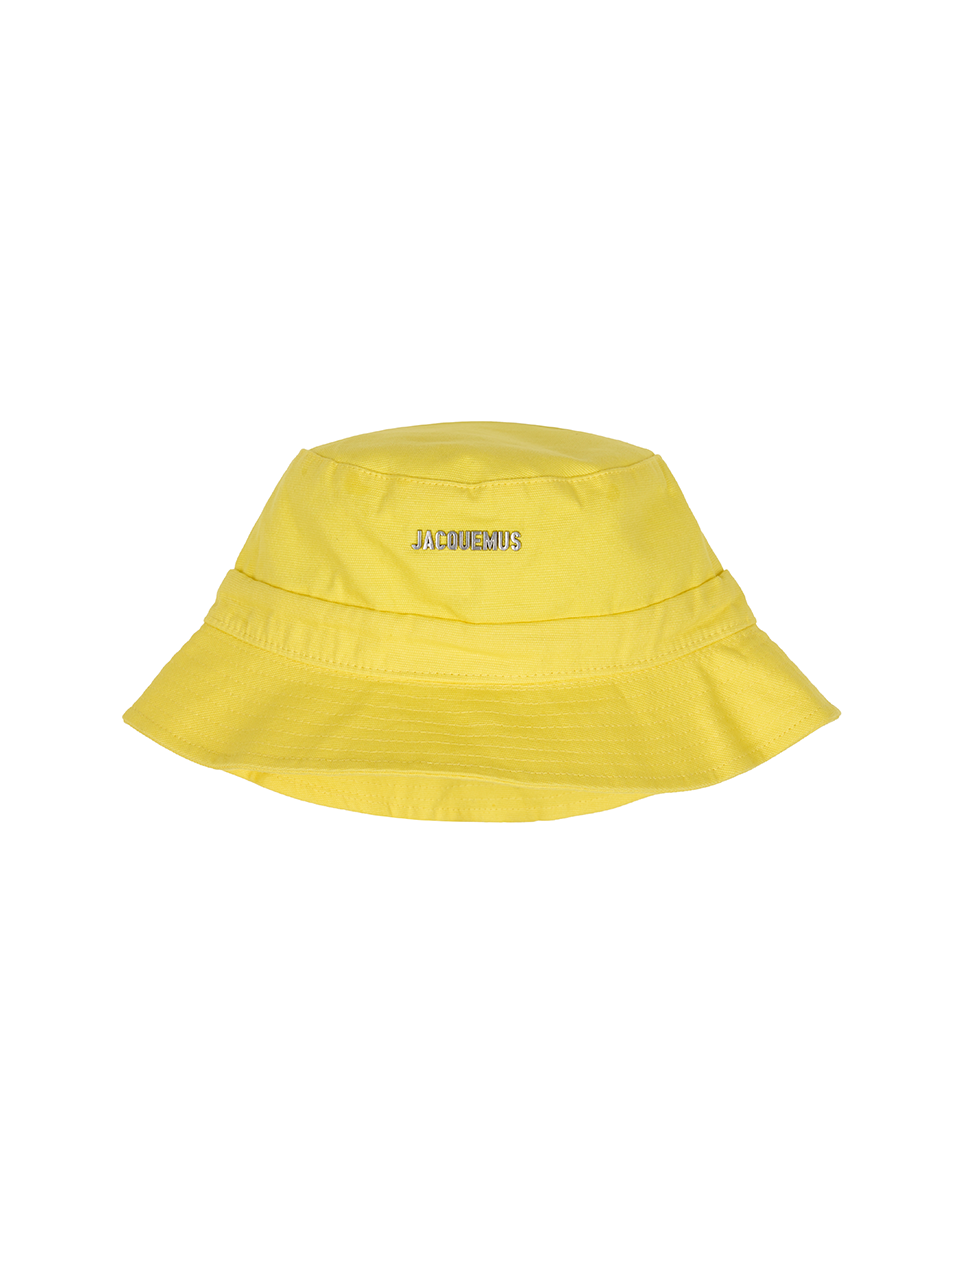 JACQUEMUS - GADJO KNOTTED BUCKET HAT (YELLOW)